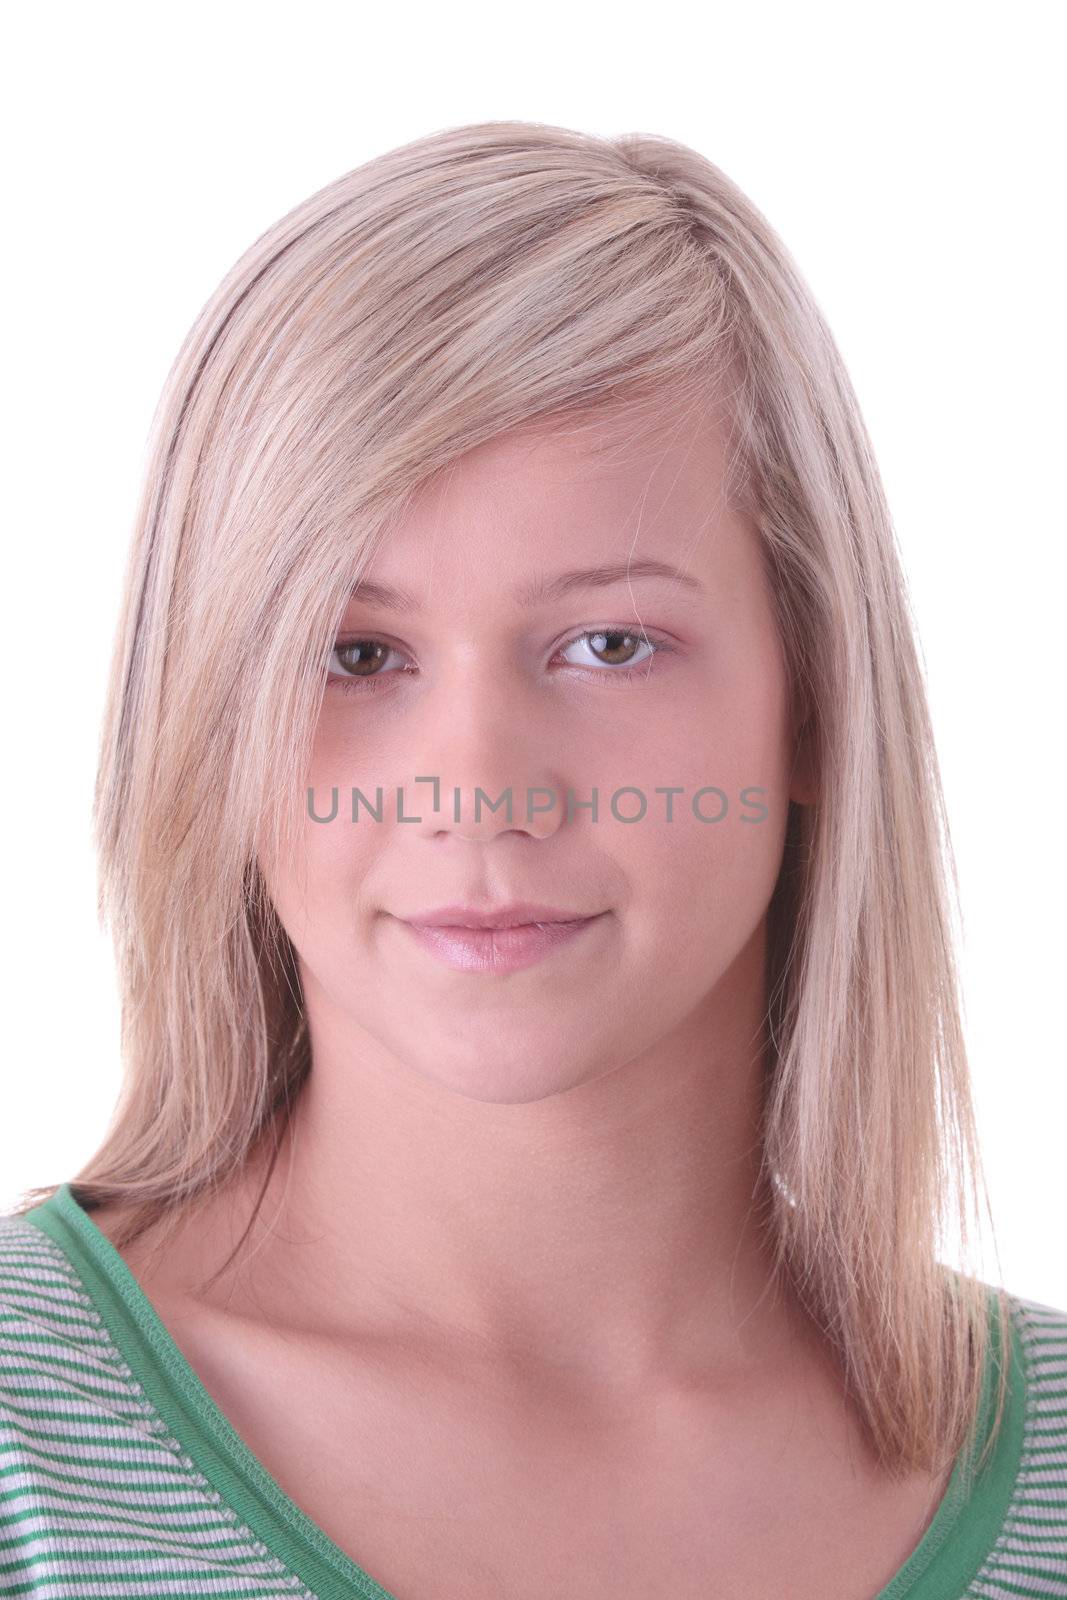 Teen blonde girl (student) portrait isolated on white background